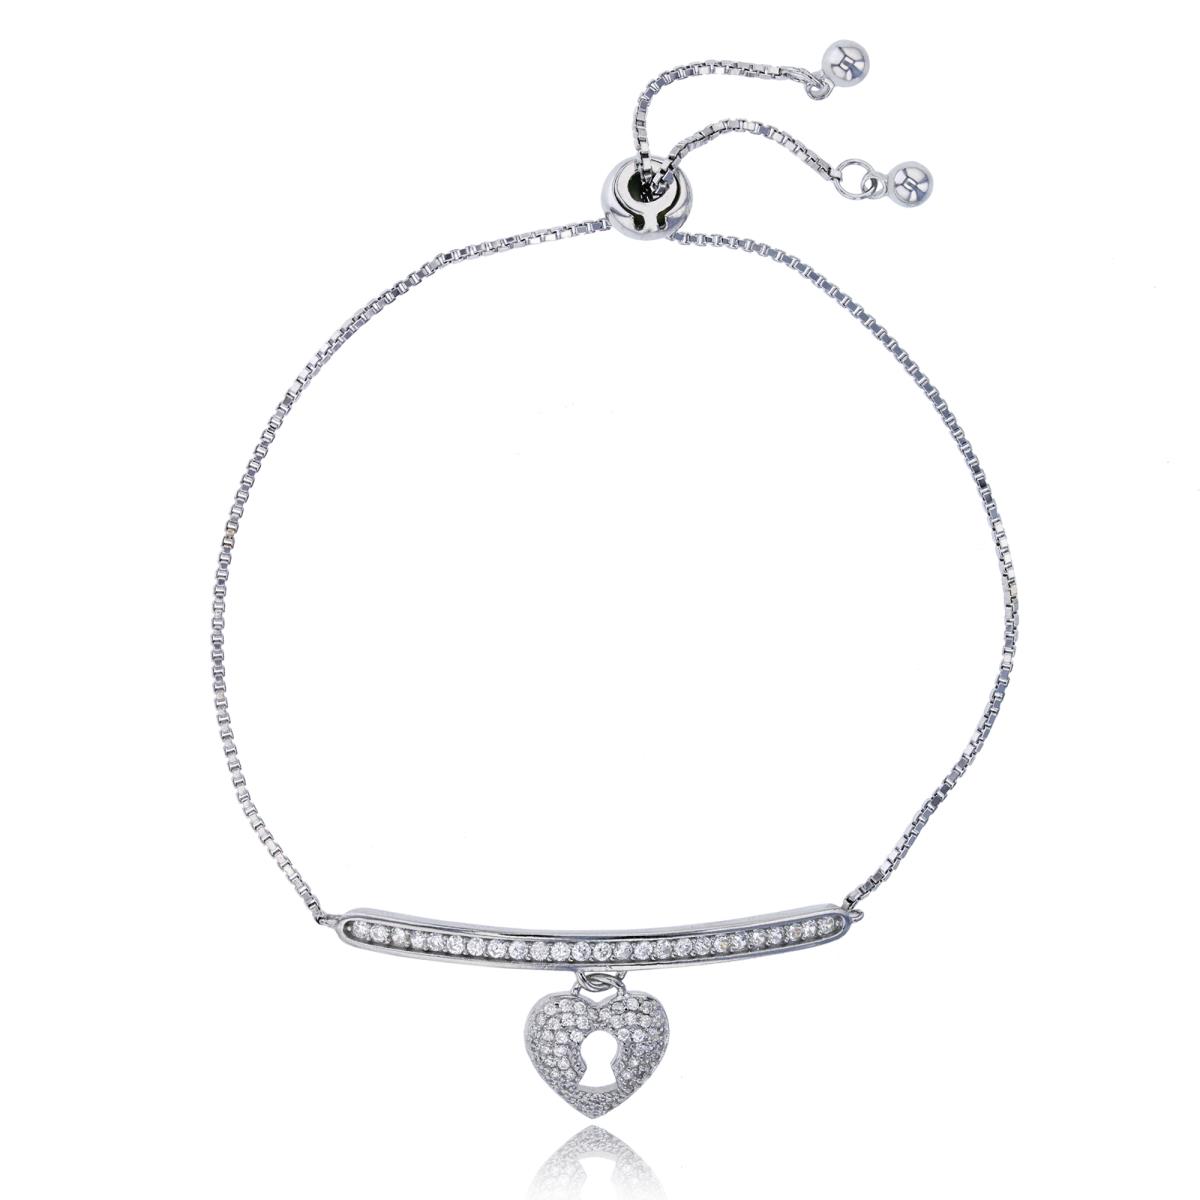 Sterling Silver Rhodium Micropave Bar with Dangling Heart Lock Adjustable Bracelet